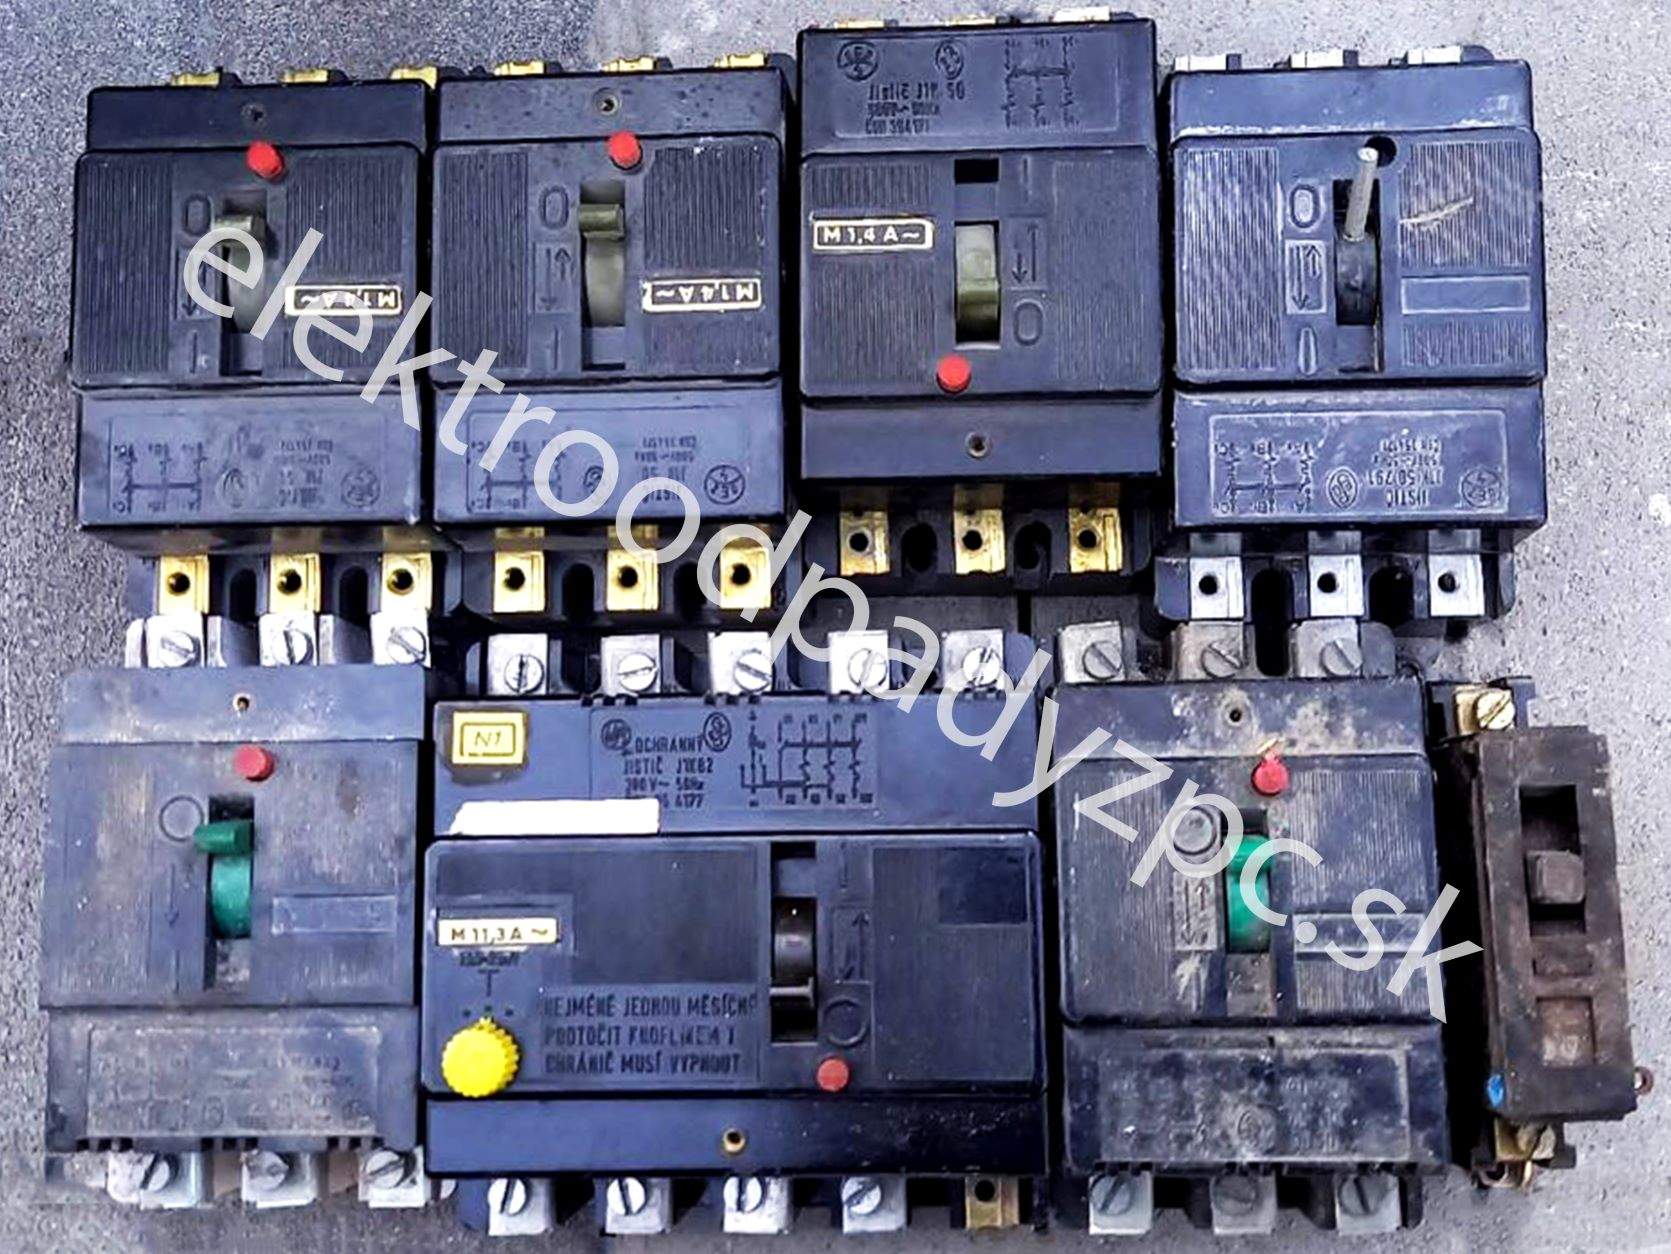 old circuit breakers and contactors